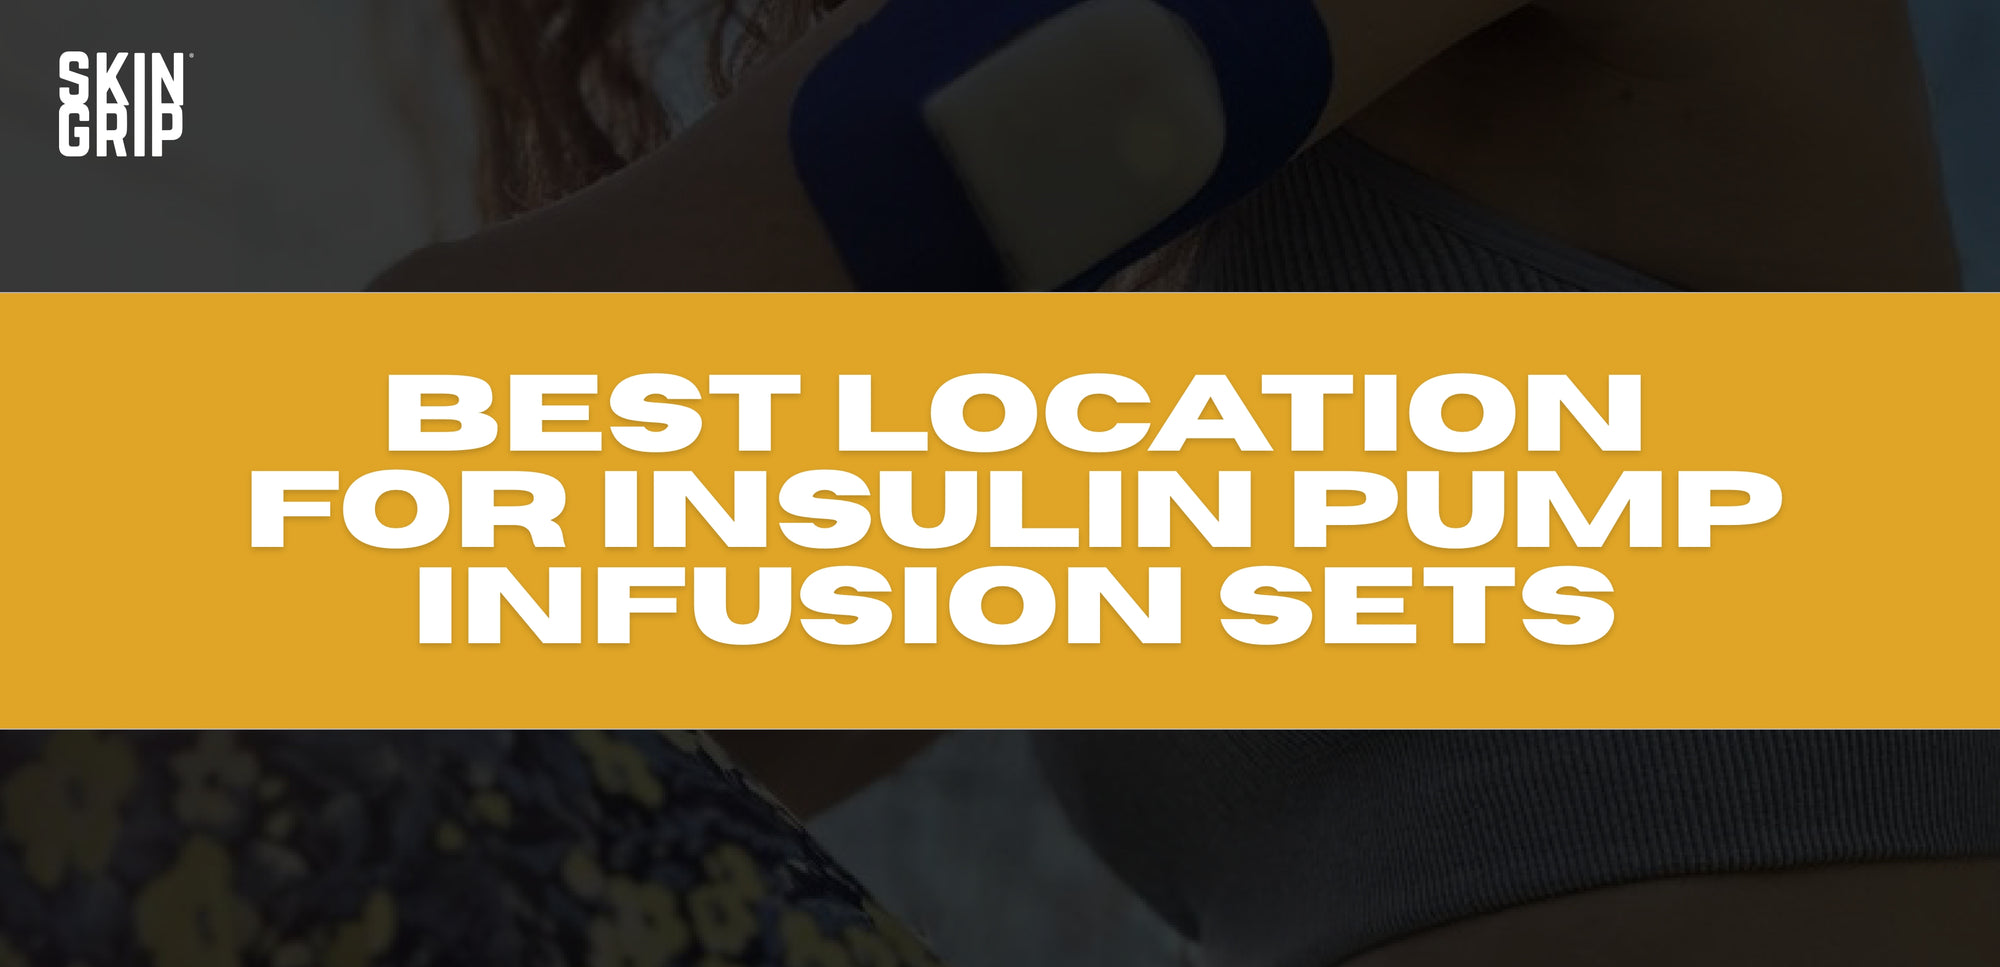 Best location for insulin pump infusion sets